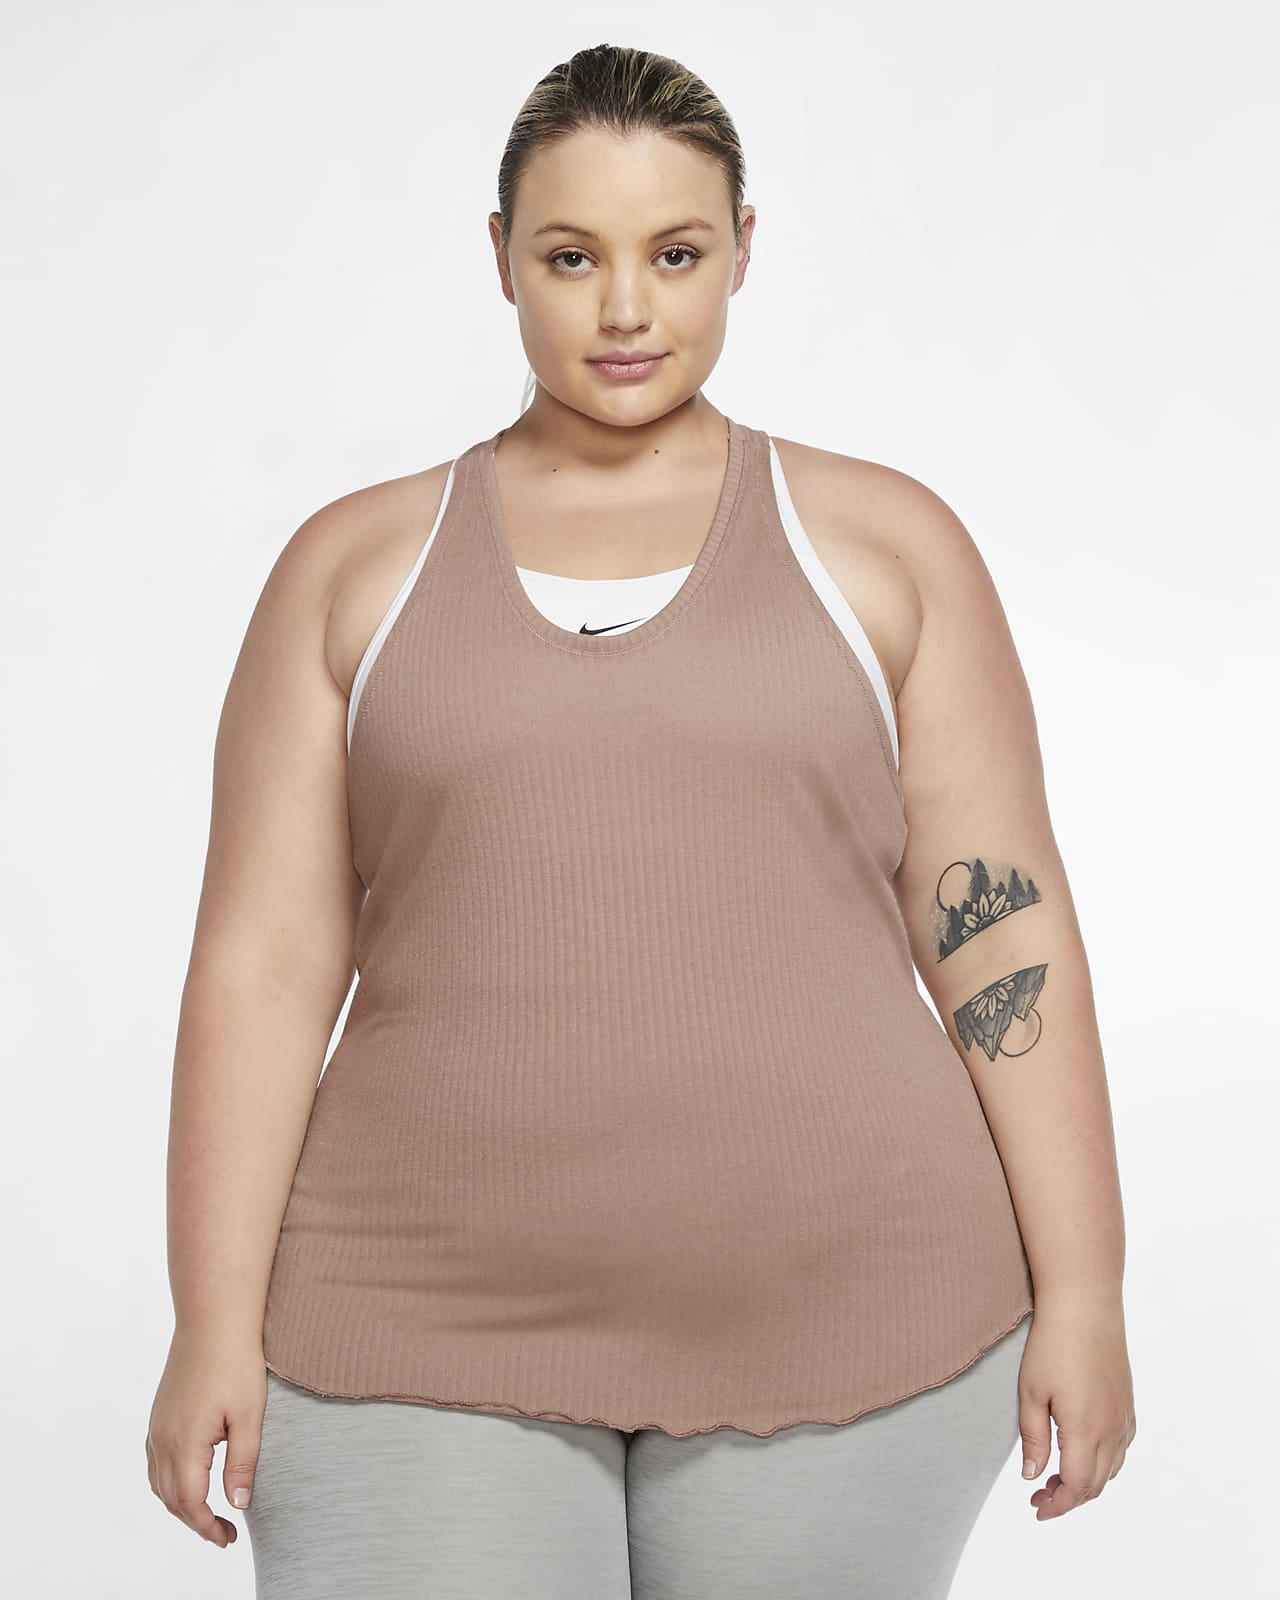 plus size fitness clothes nike